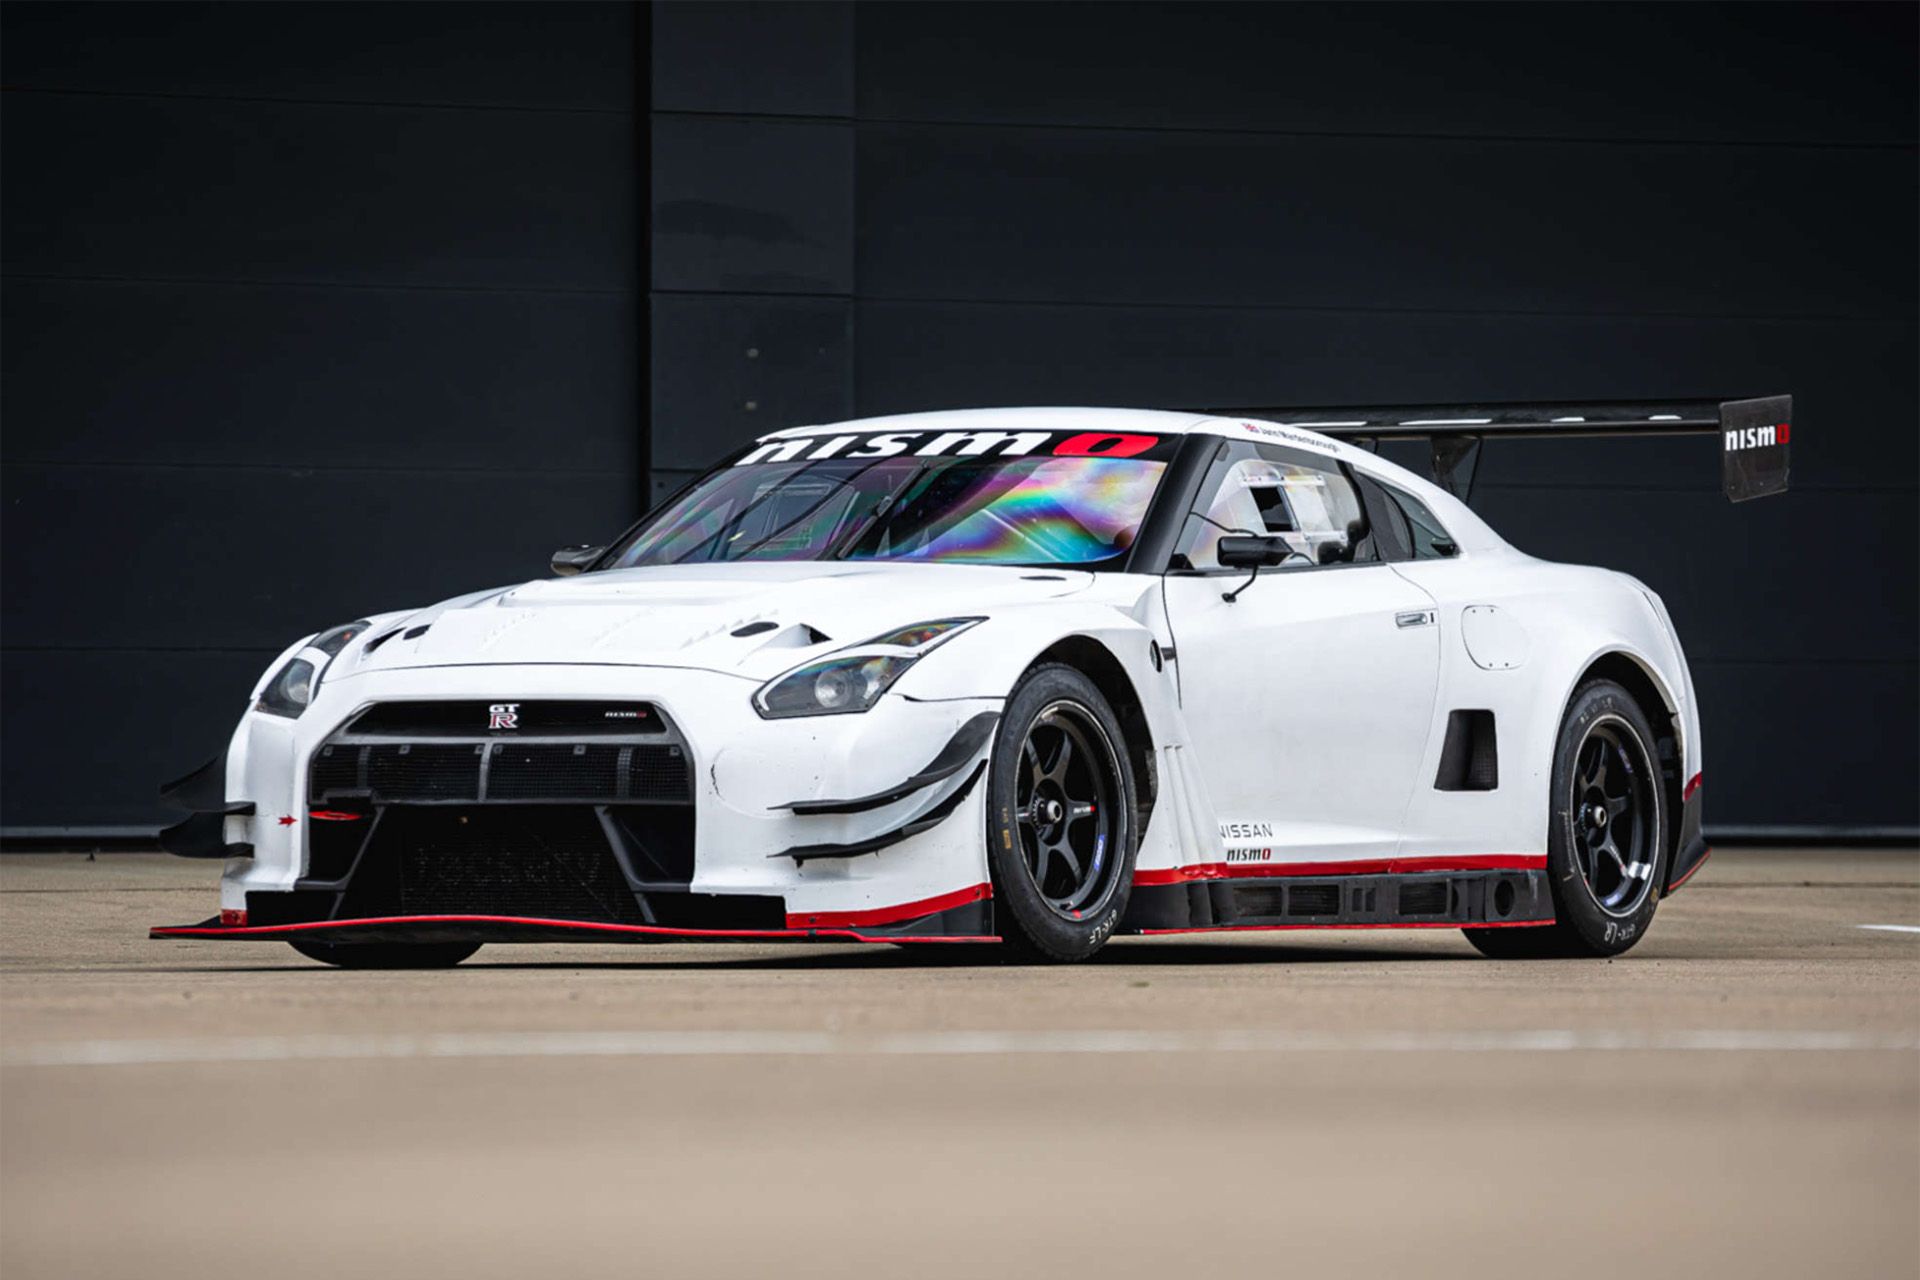 Actual Nissan GT-R at heart of 'Gran Turismo' movie up for sale | Driving